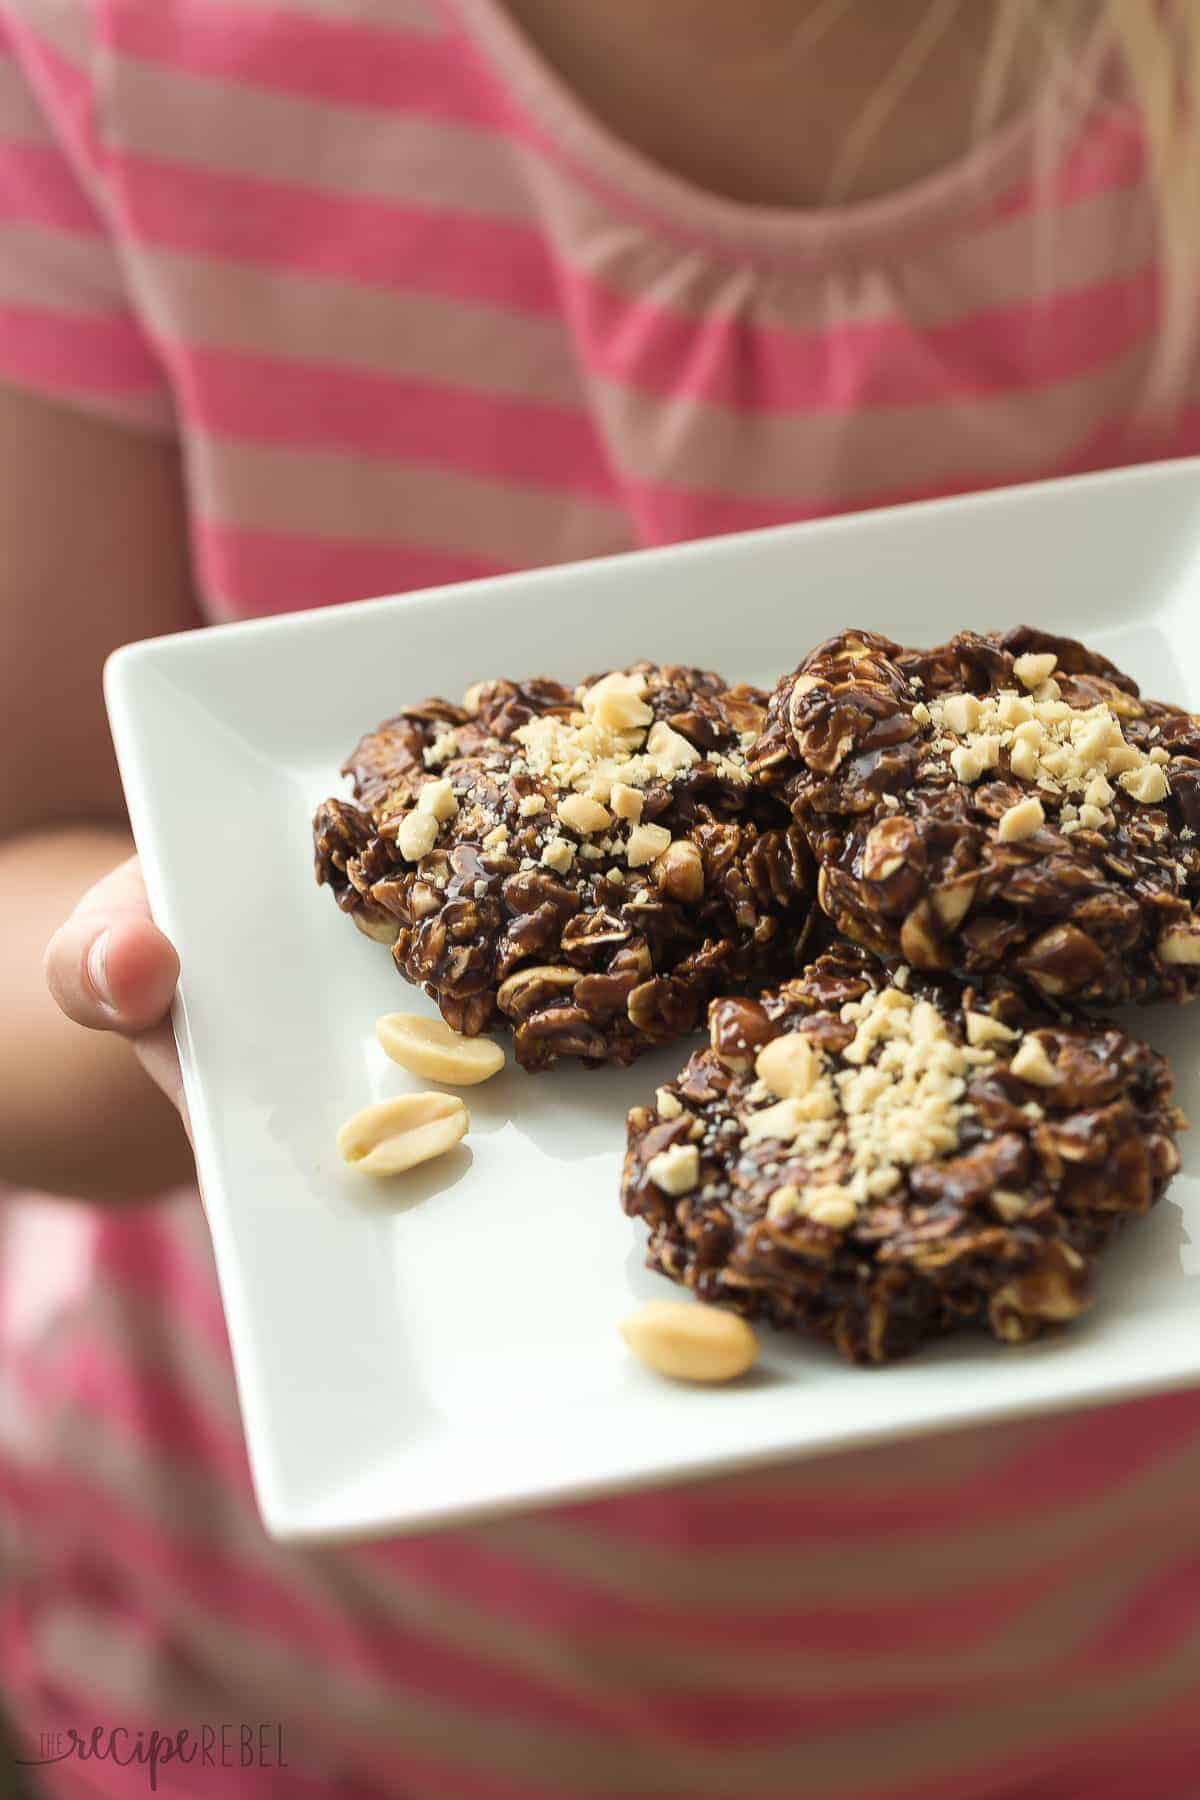 childs hands holding a plate of three no bake chocolate peanut butter cookies